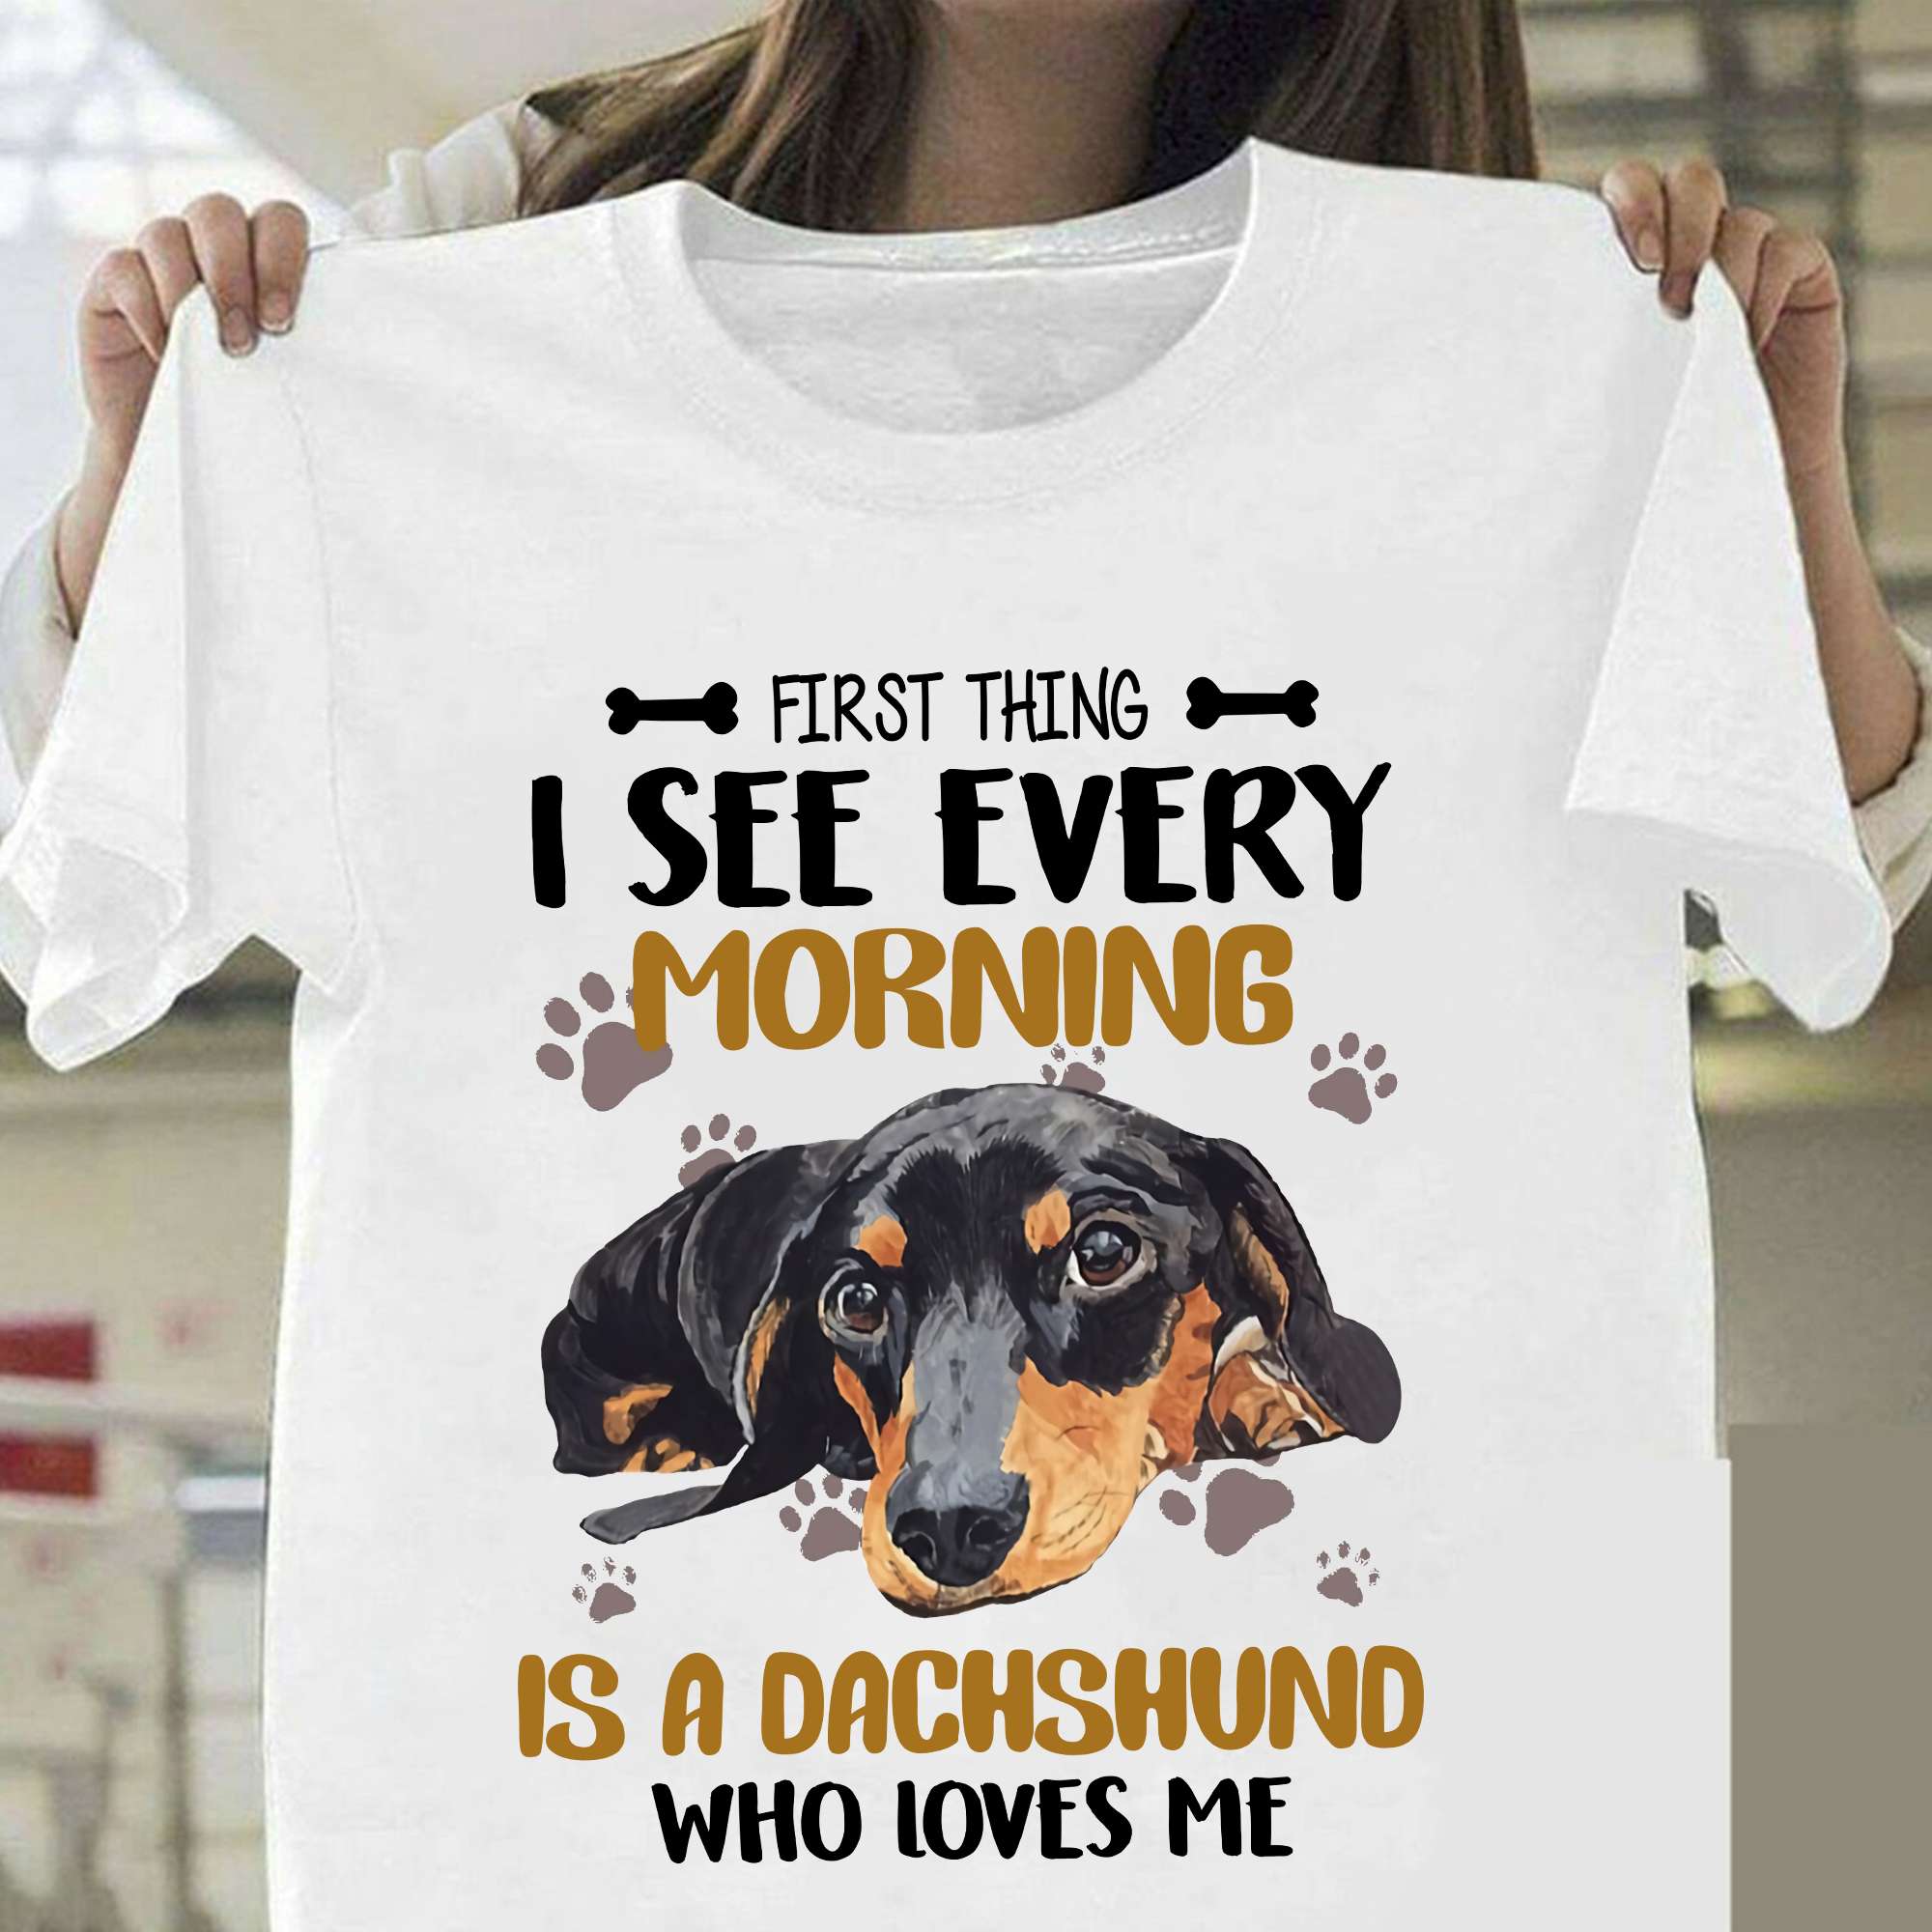 First thing i see every morning is a dachshund who loves me